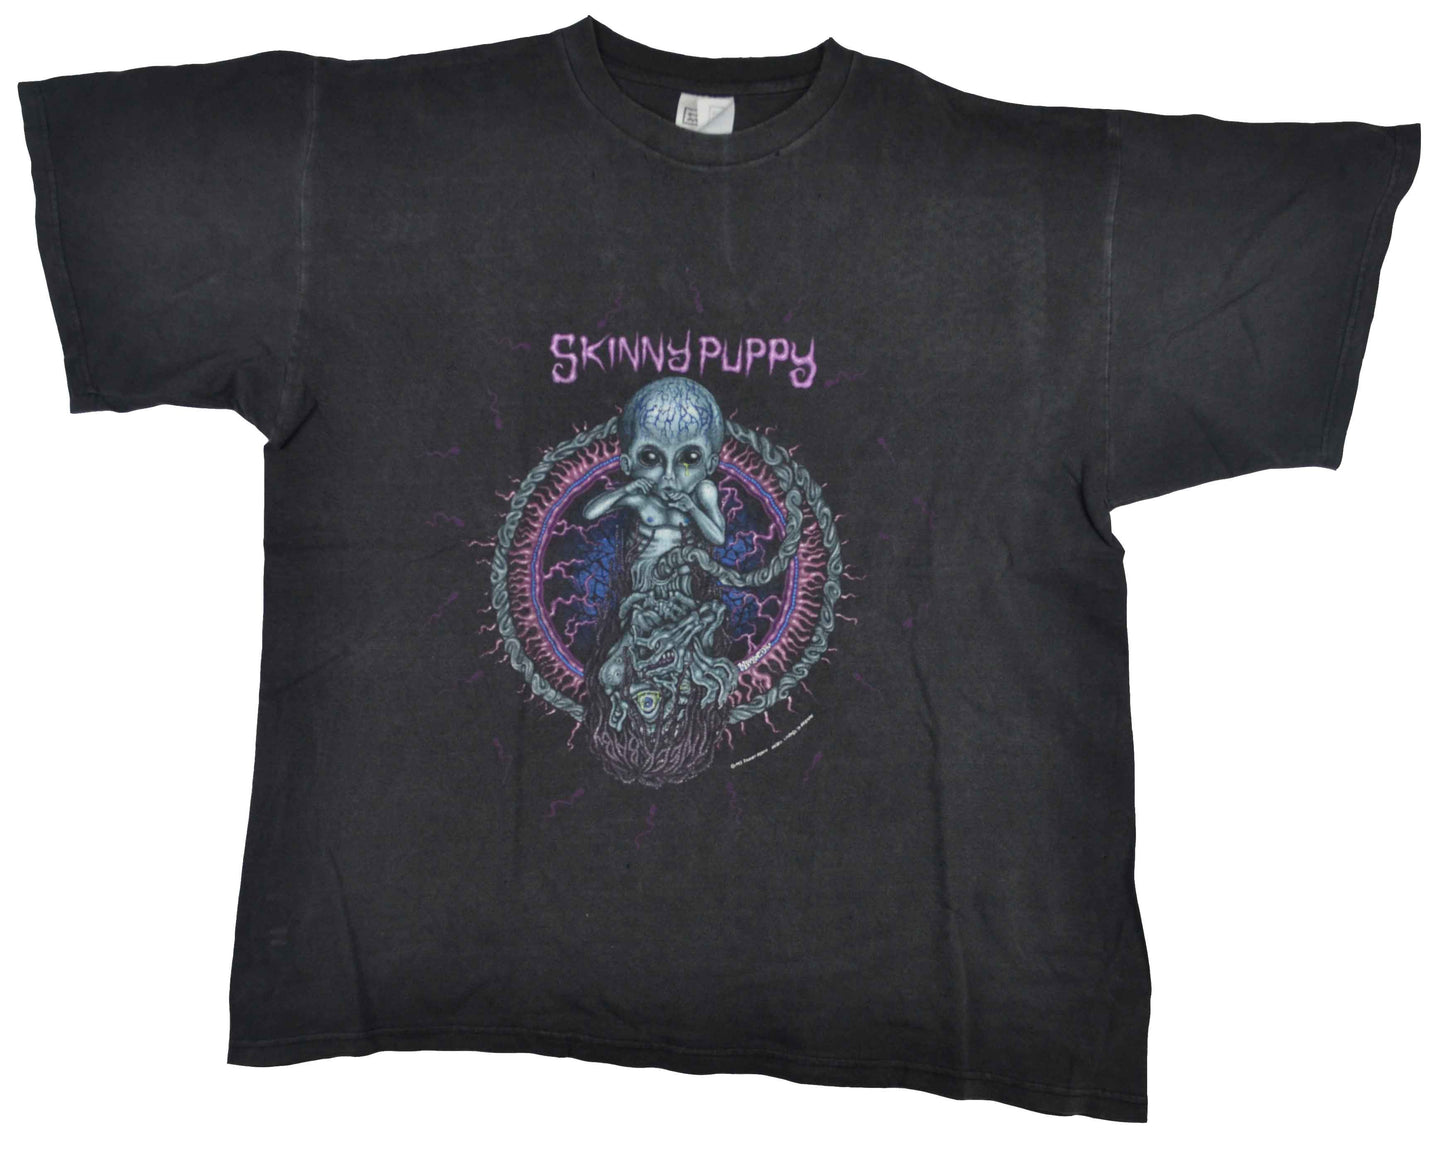 Vintage Skinny Puppy 1993 Band Shirt  Skinny Puppy is a Canadian industrial music group. Is widely considered to be one of the founders of the industrial rock and electro-industrial genres. The tee has a perfect fade and a crazy vintage look.